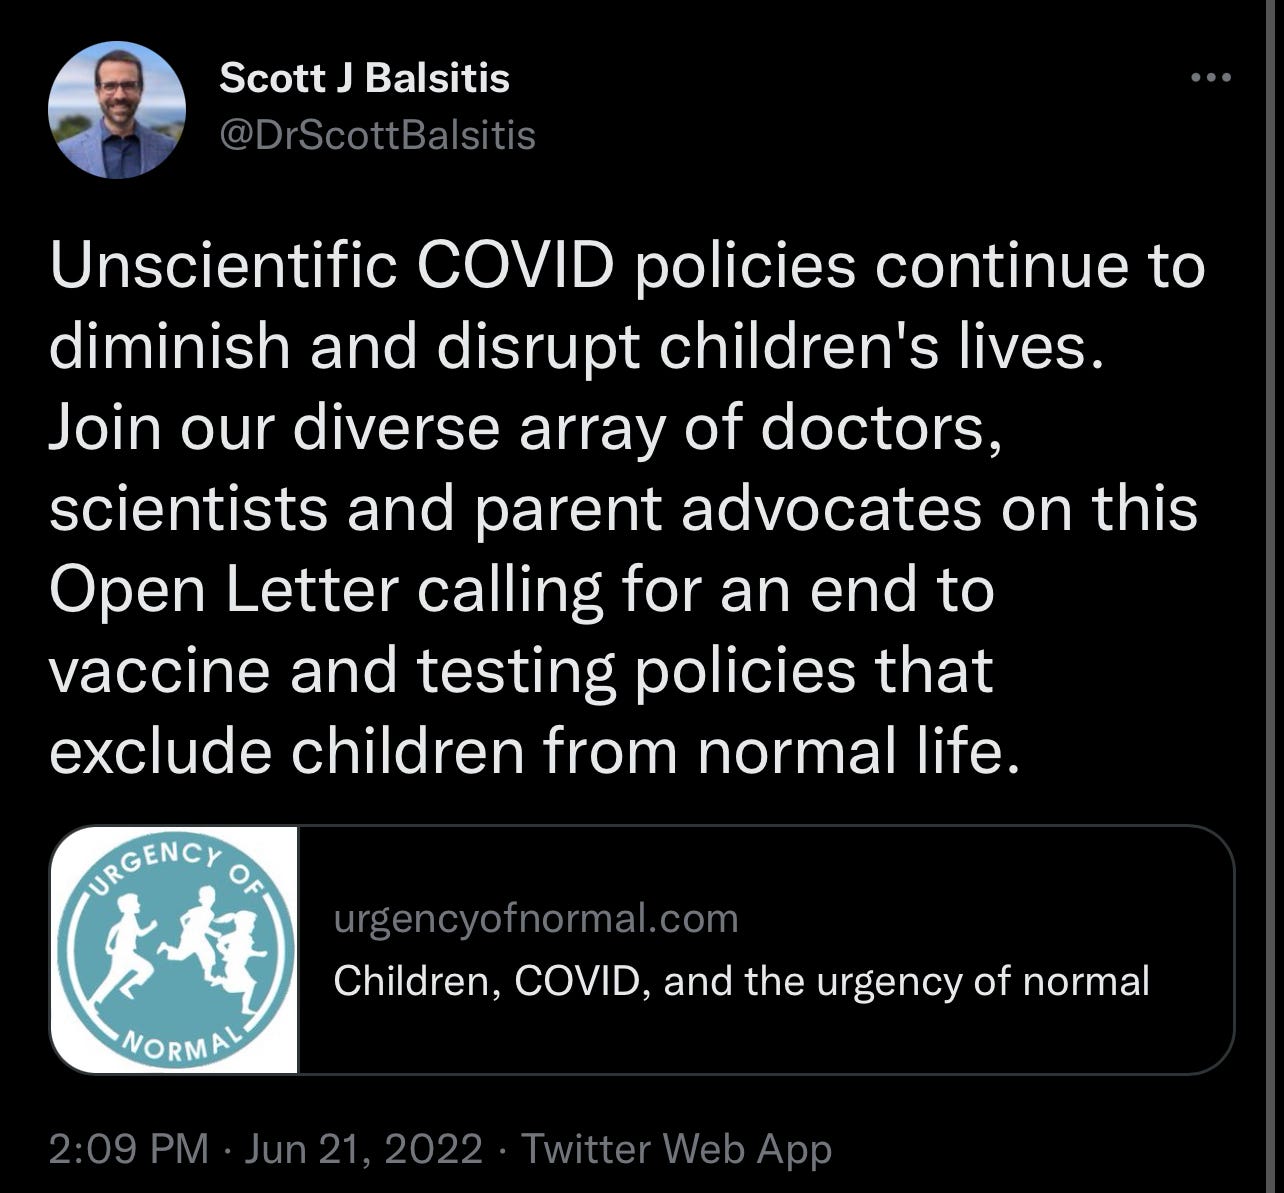 Dr Scott J Balsitis tweets "Join our diverse array of doctors, scientists and parent advocates on this Open Letter calling for an end to vaccine and testing policies that exclude children from normal life."